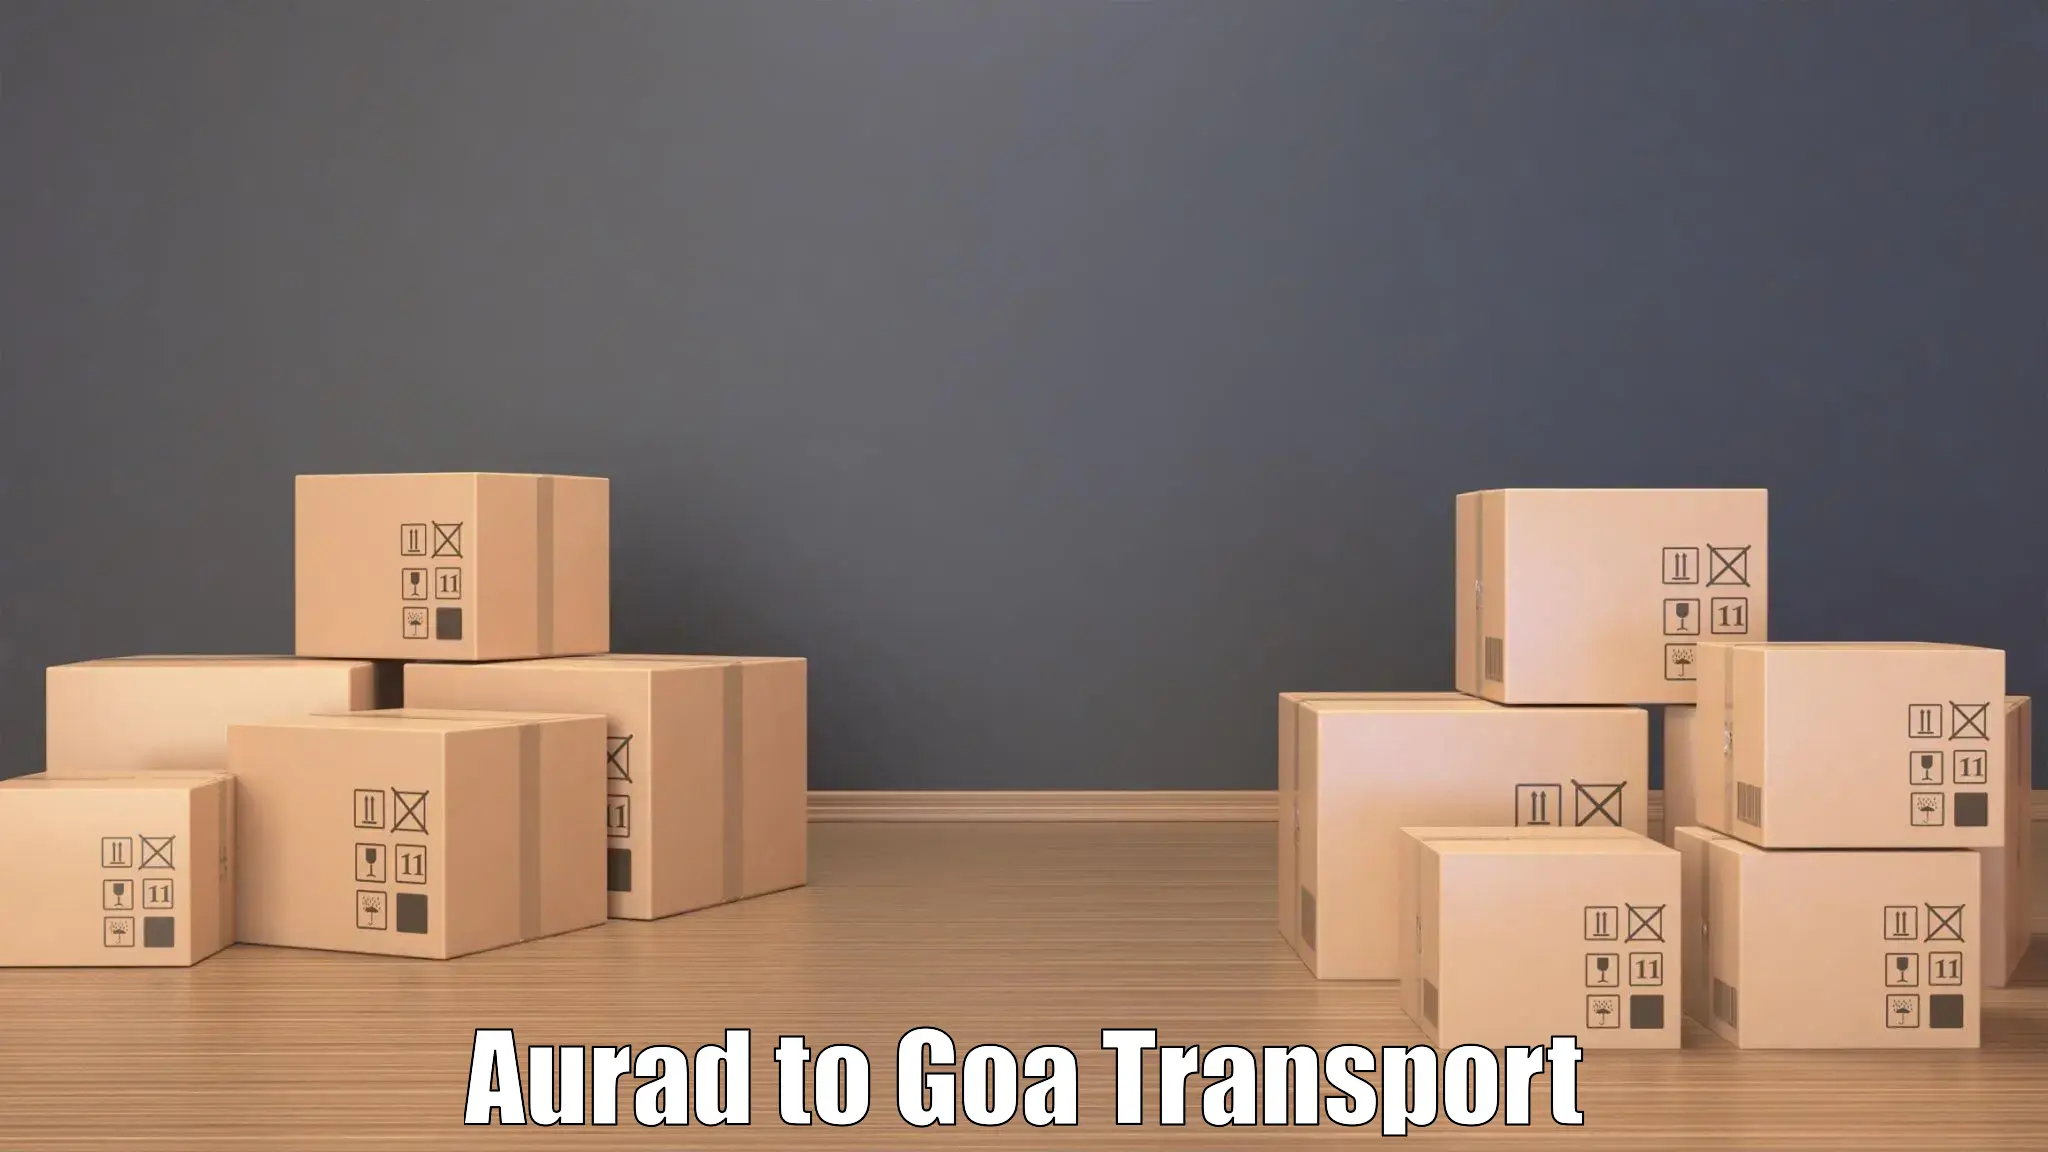 Nearby transport service Aurad to Goa